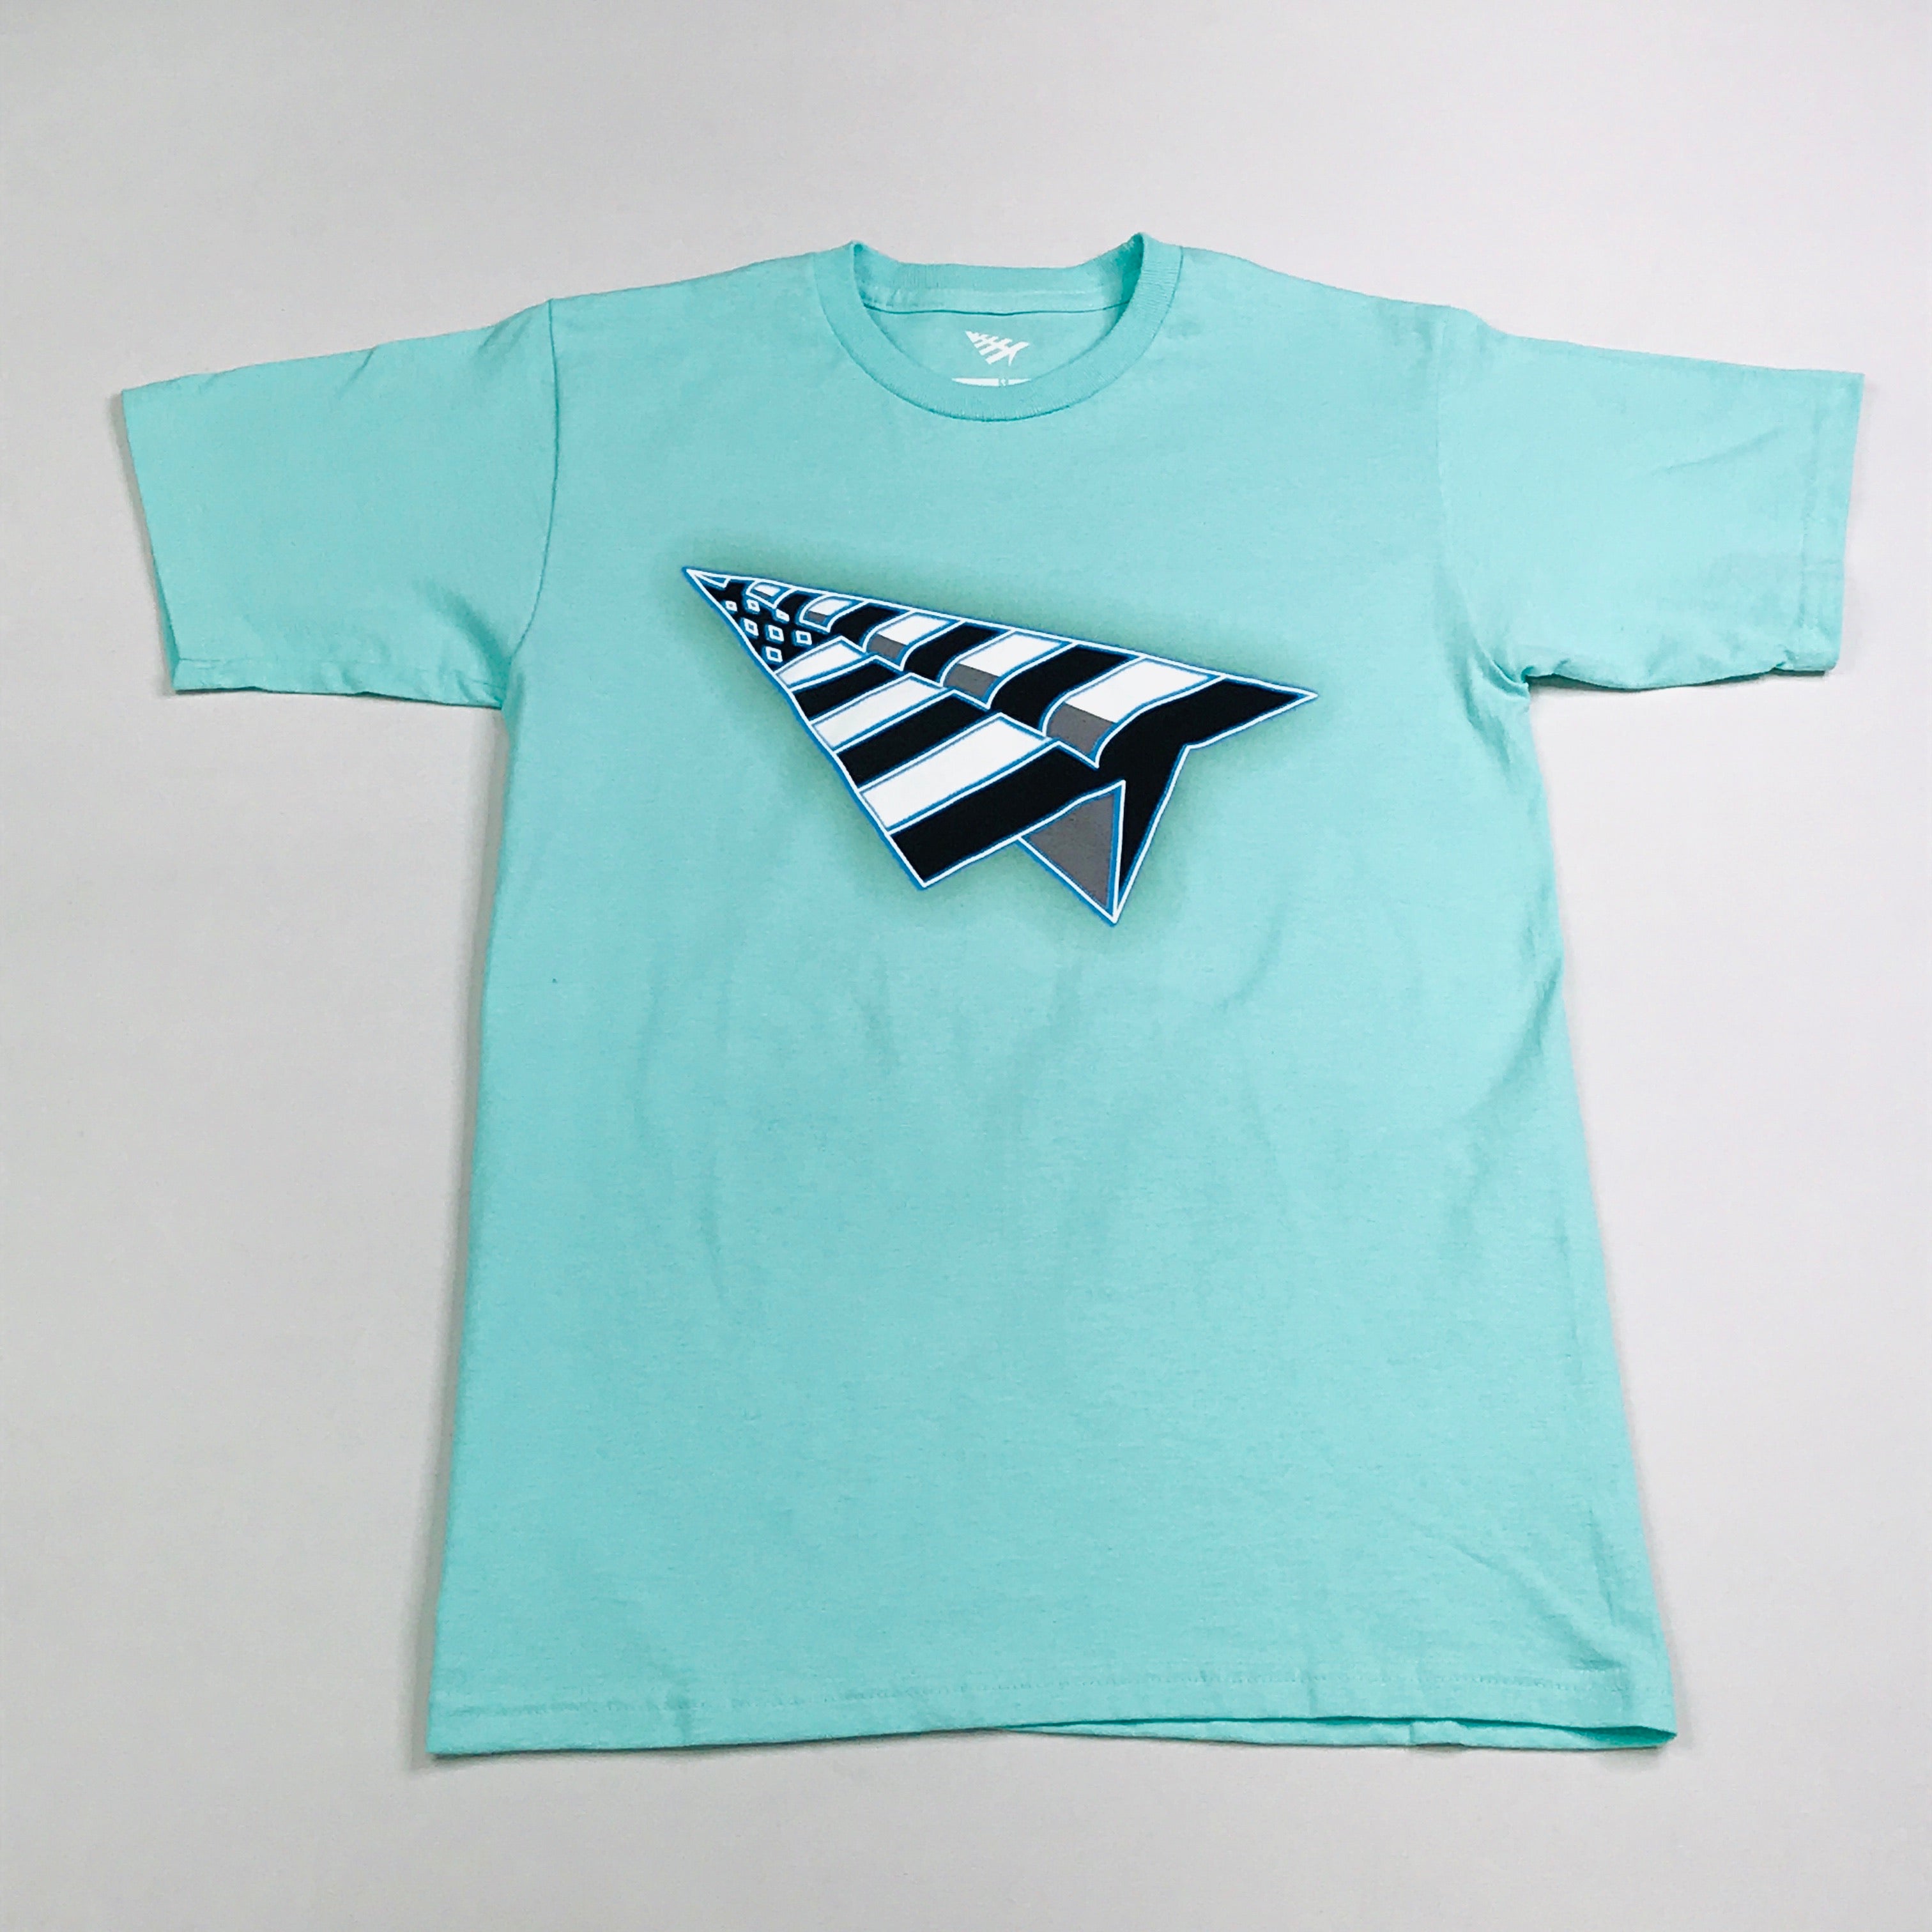 Planes Flag tee in mint